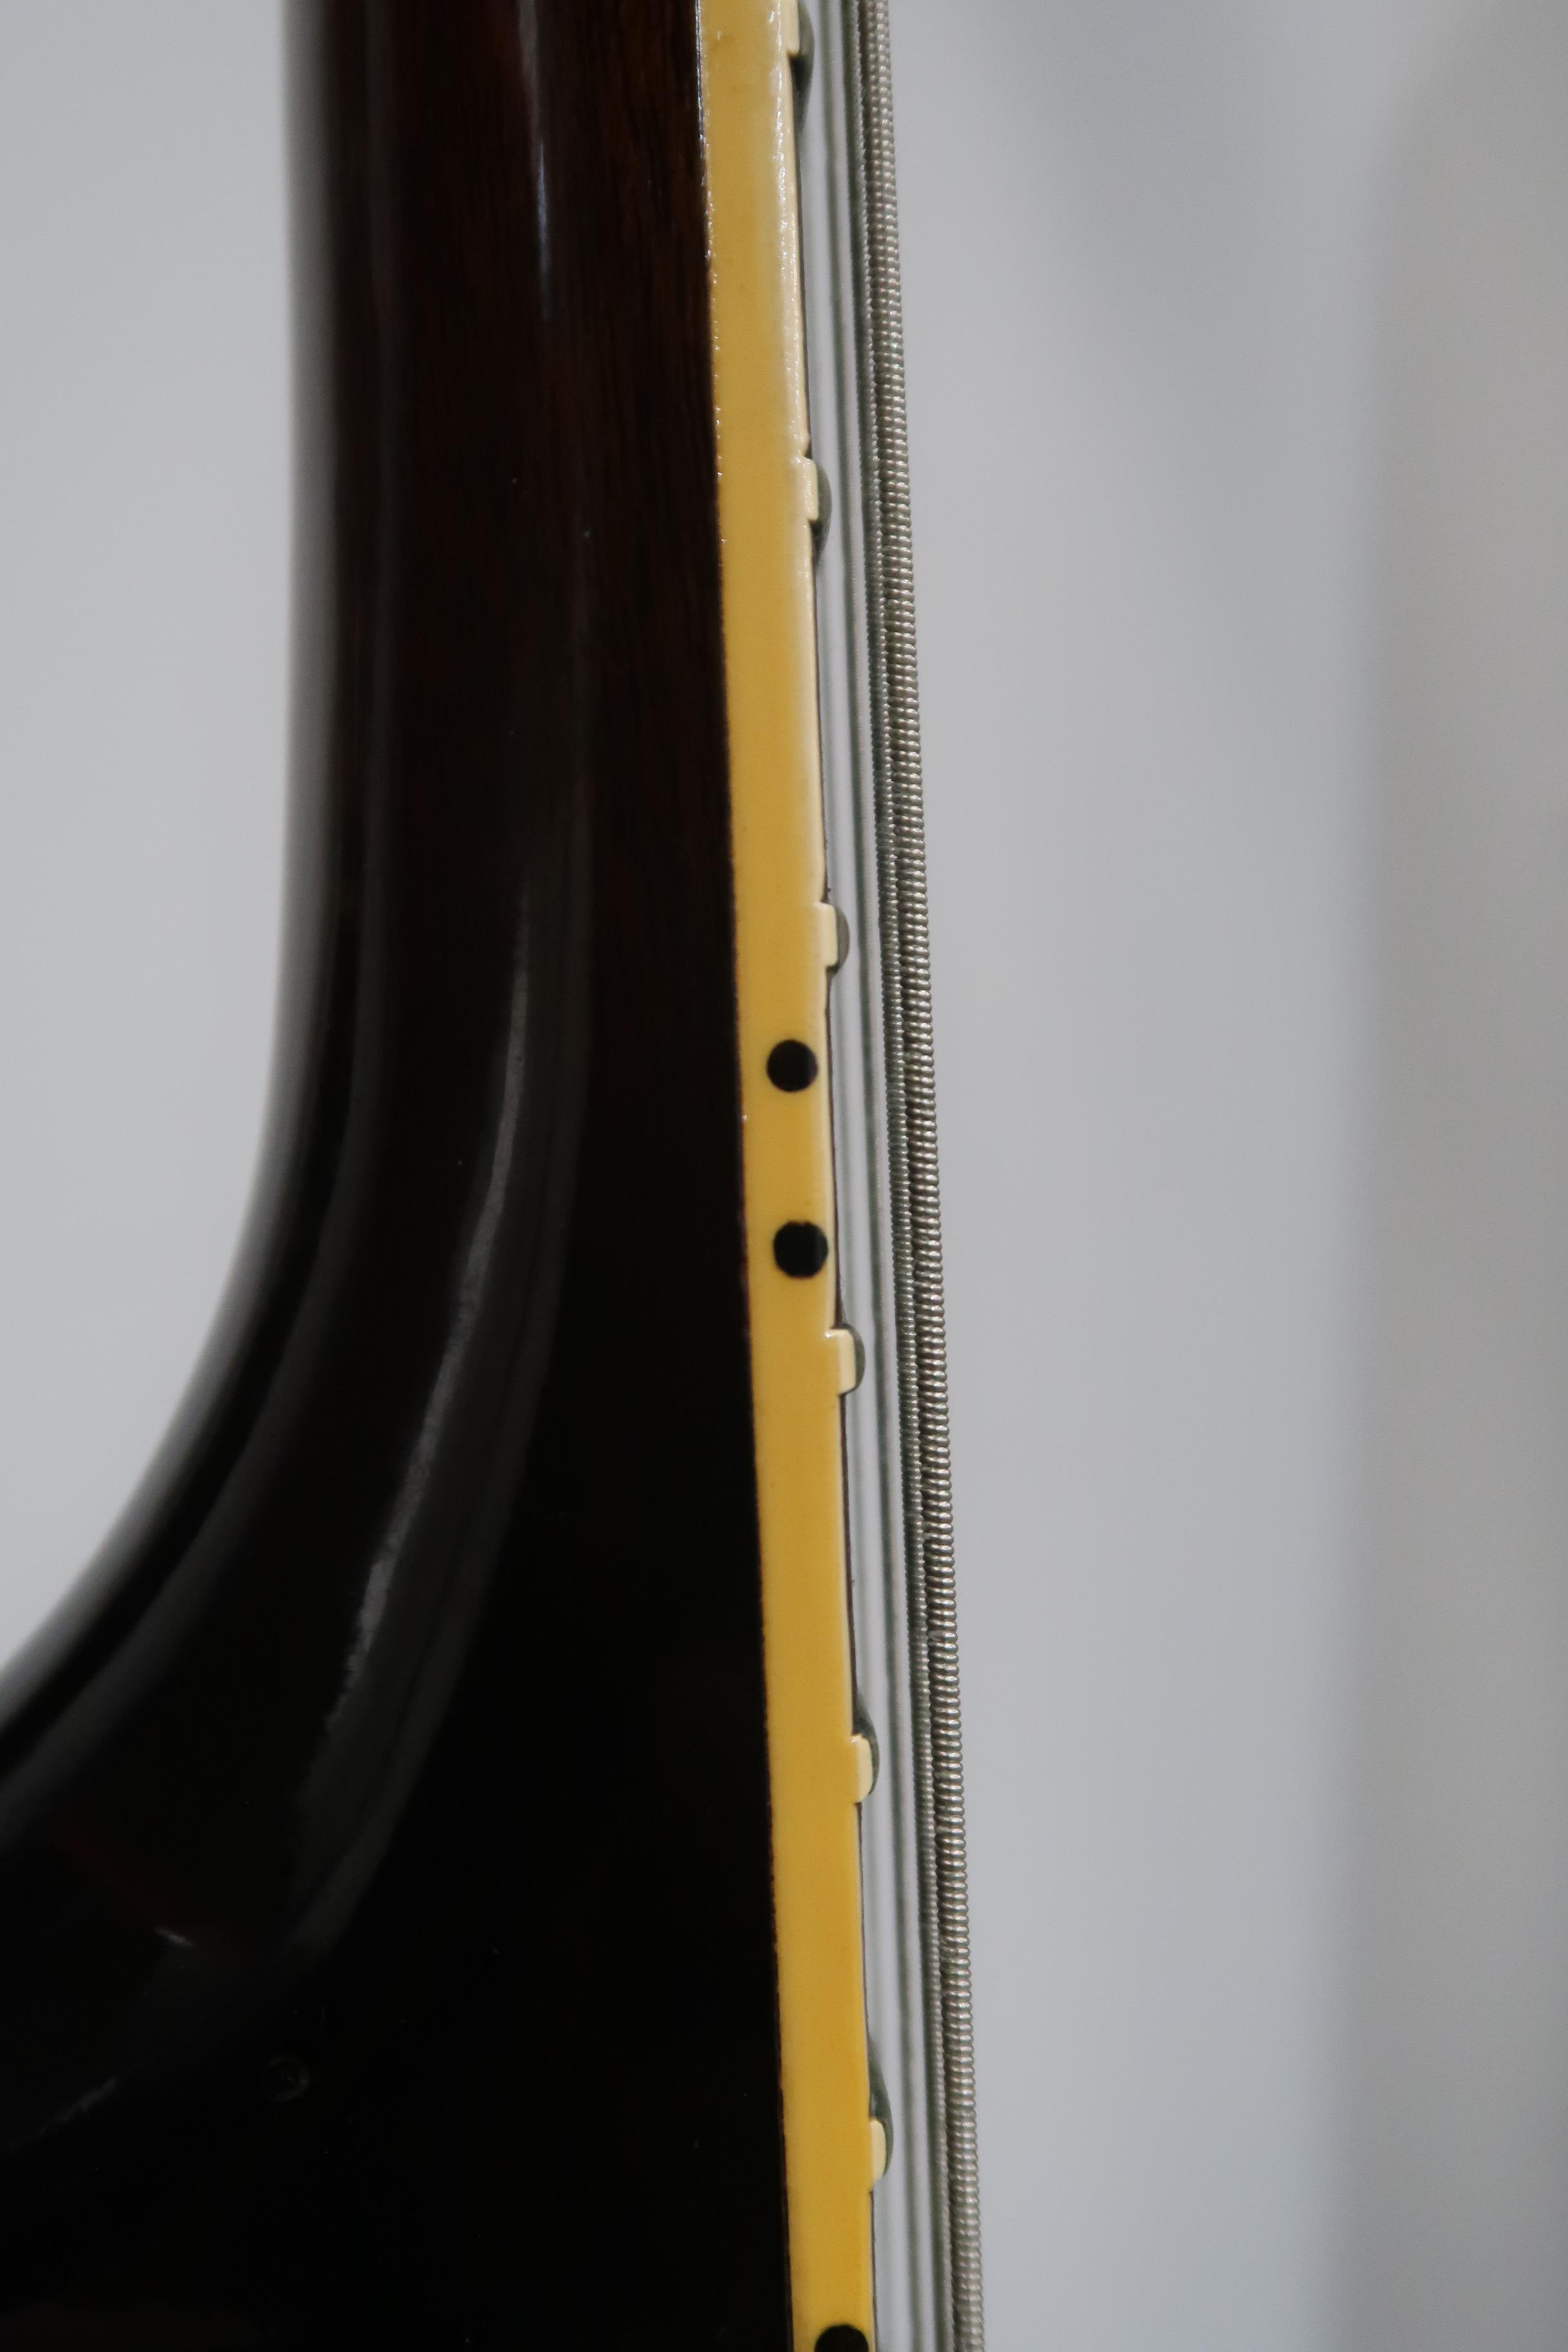 GIBSON a Gibson J160E electro acoustic guitar in dark sunburst serial number 890922 circa 1969 - Image 16 of 39